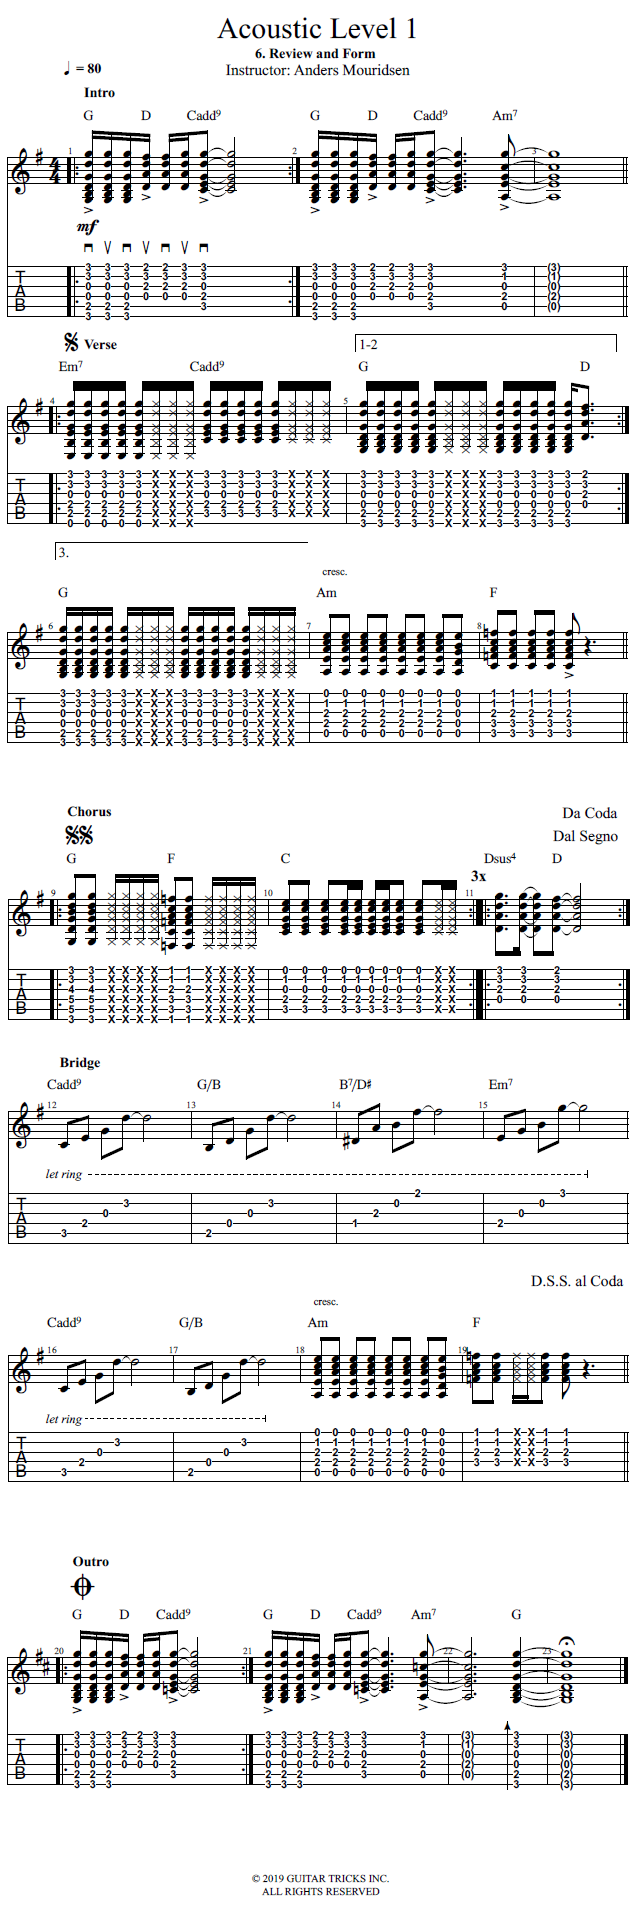 Review and Form song notation